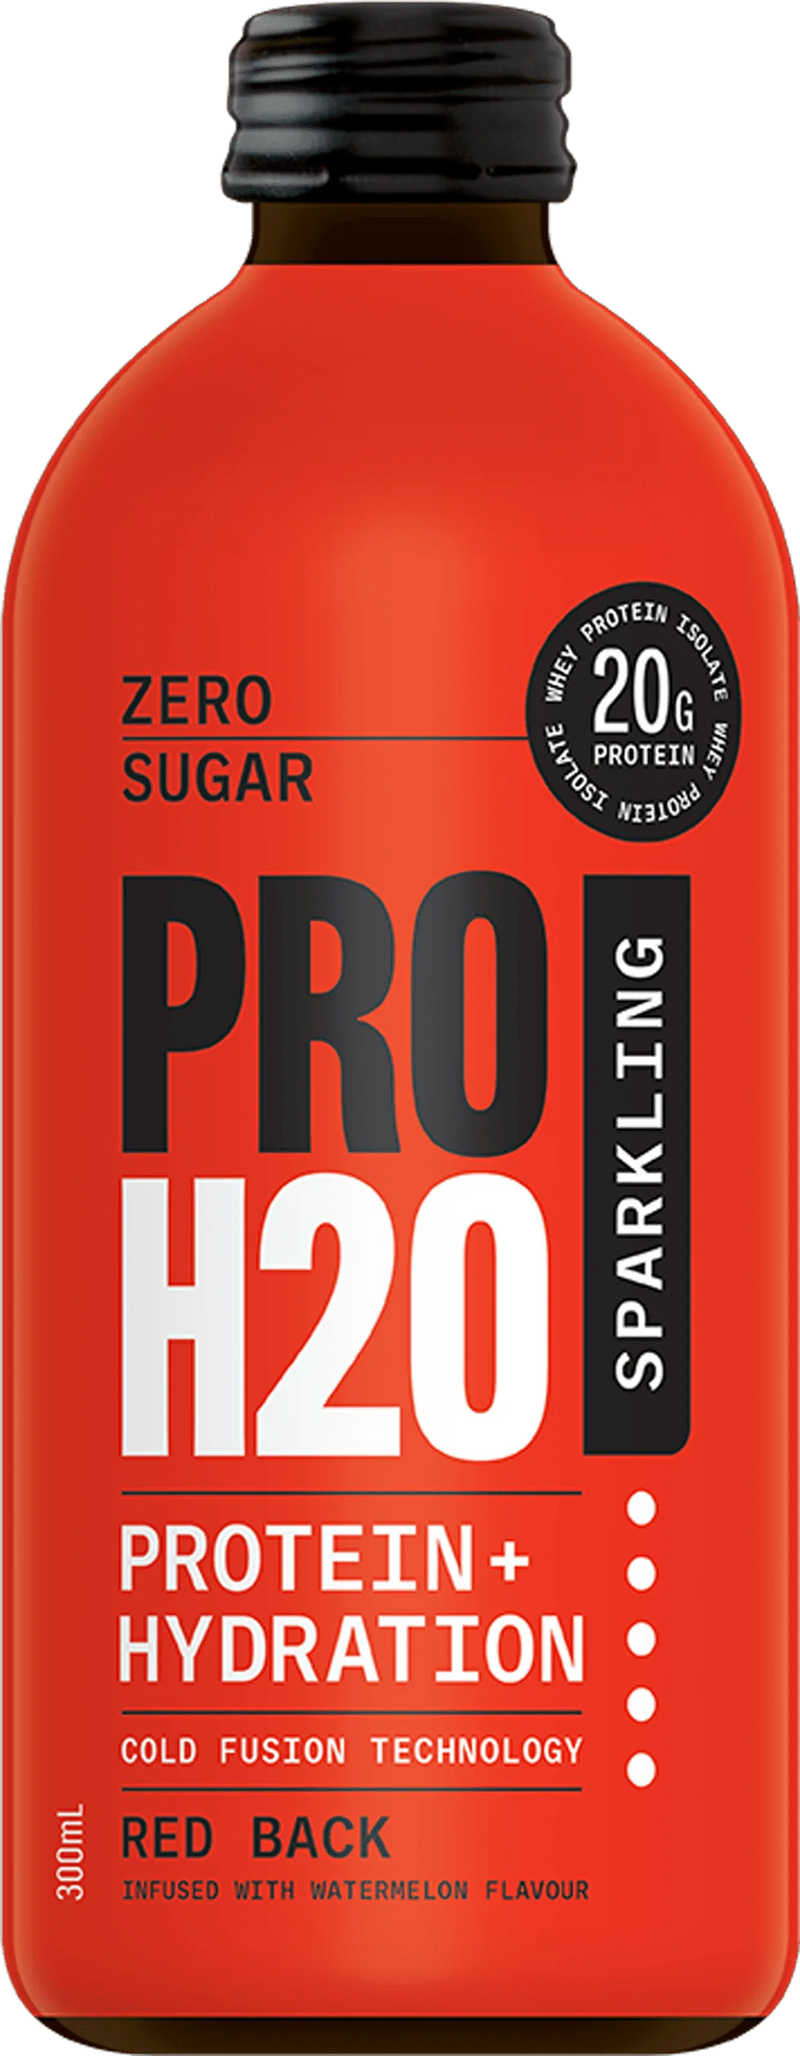 PROH20 RED BACK WATERMELON FLAVOURED